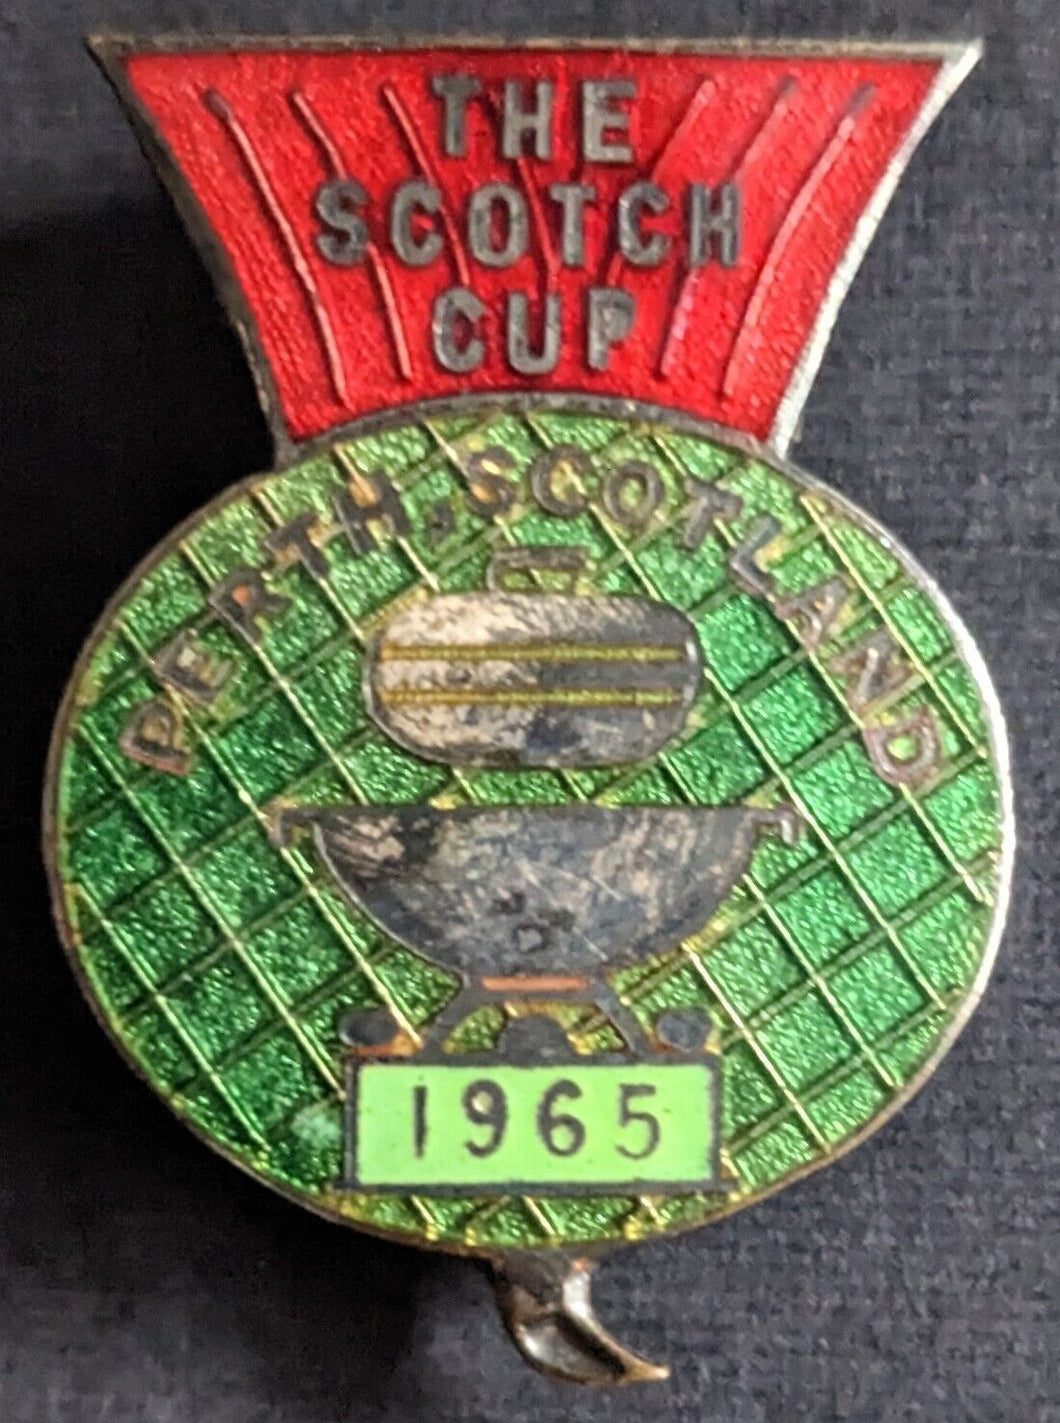 1965 Scotch Cup World Curling Championship Pin Vintage Historical Perth Scotand